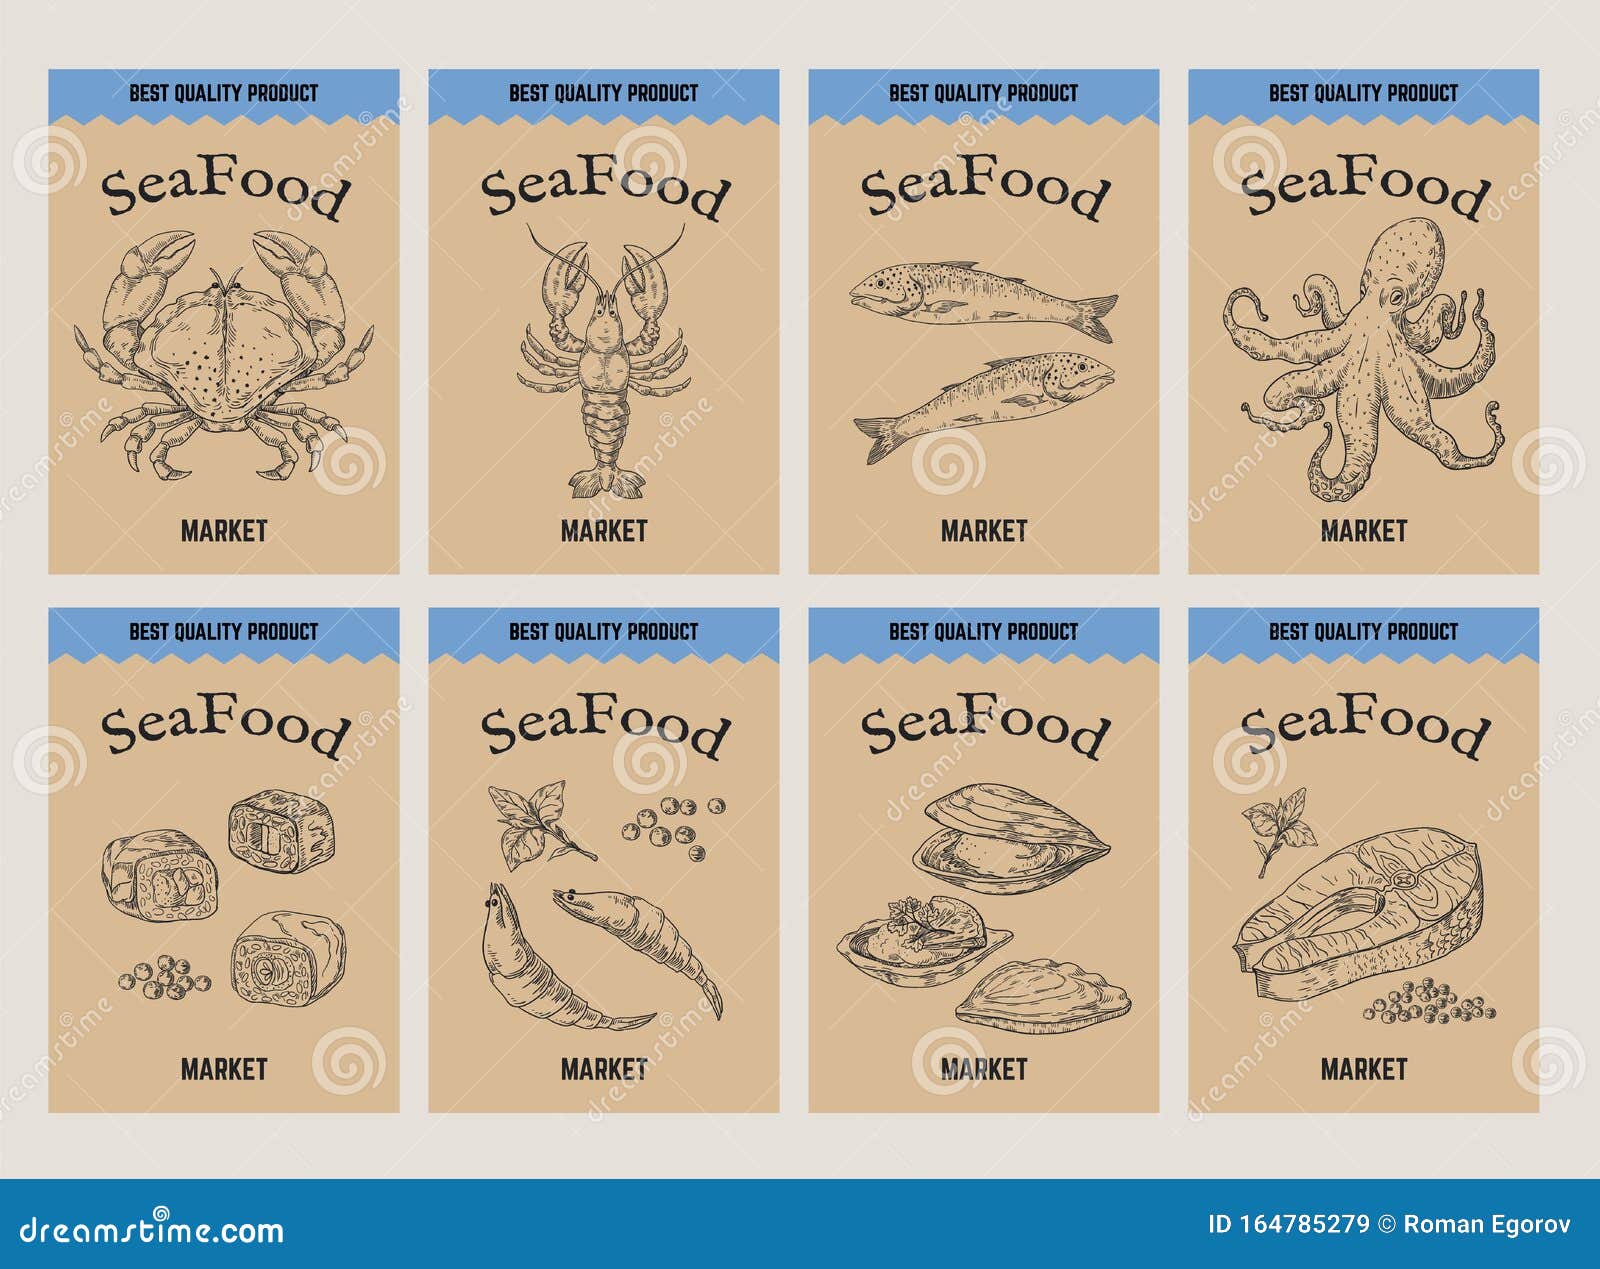 sea food banner. retro hand drawn labels price templates.  tags for shop or market. organic food 